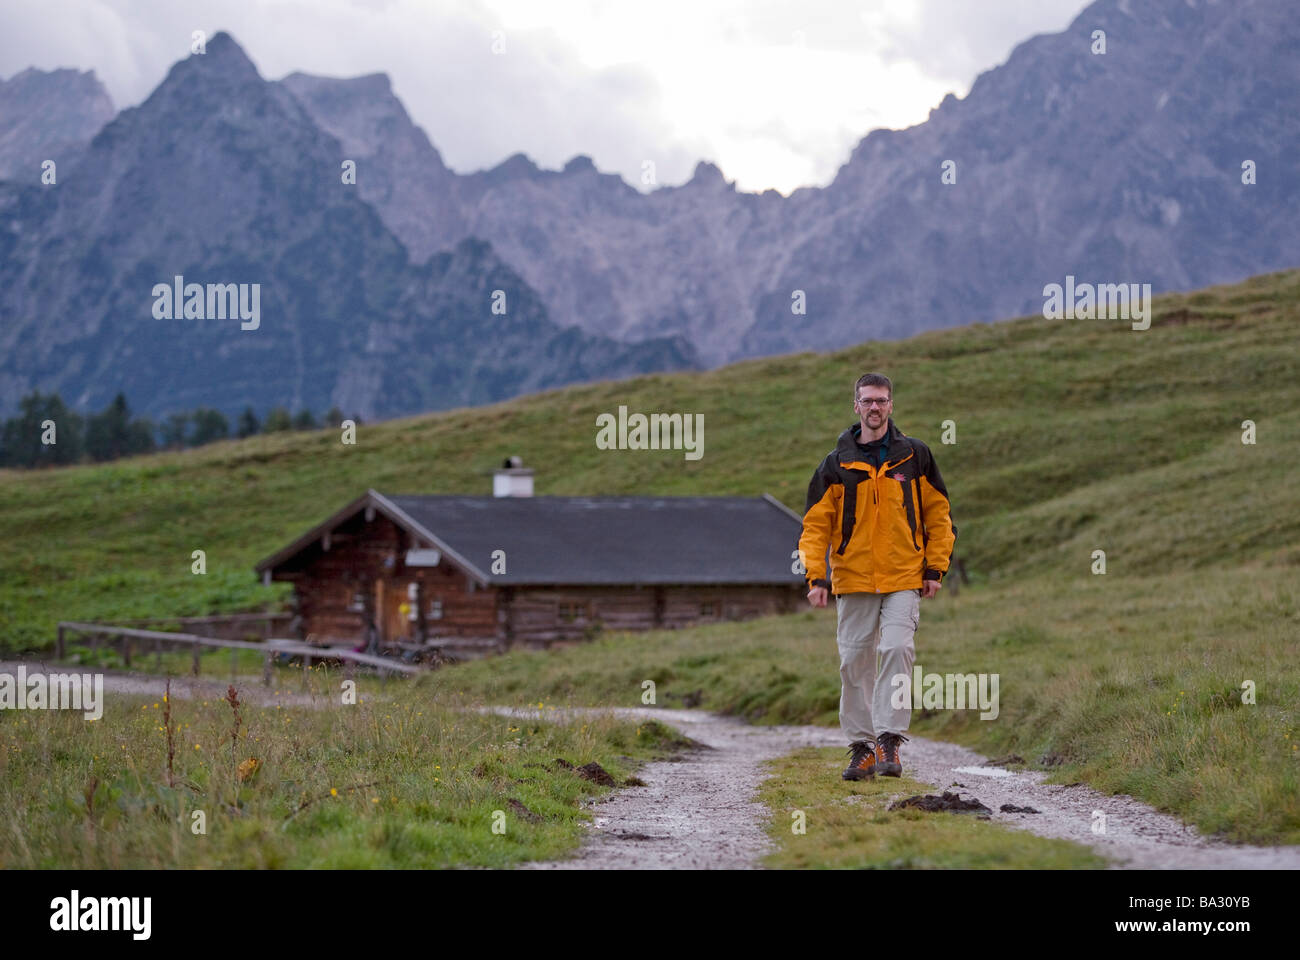 Middle aged hiker on trail near Koenigssee Berchtesgaden Alps Germany August 2008 Stock Photo